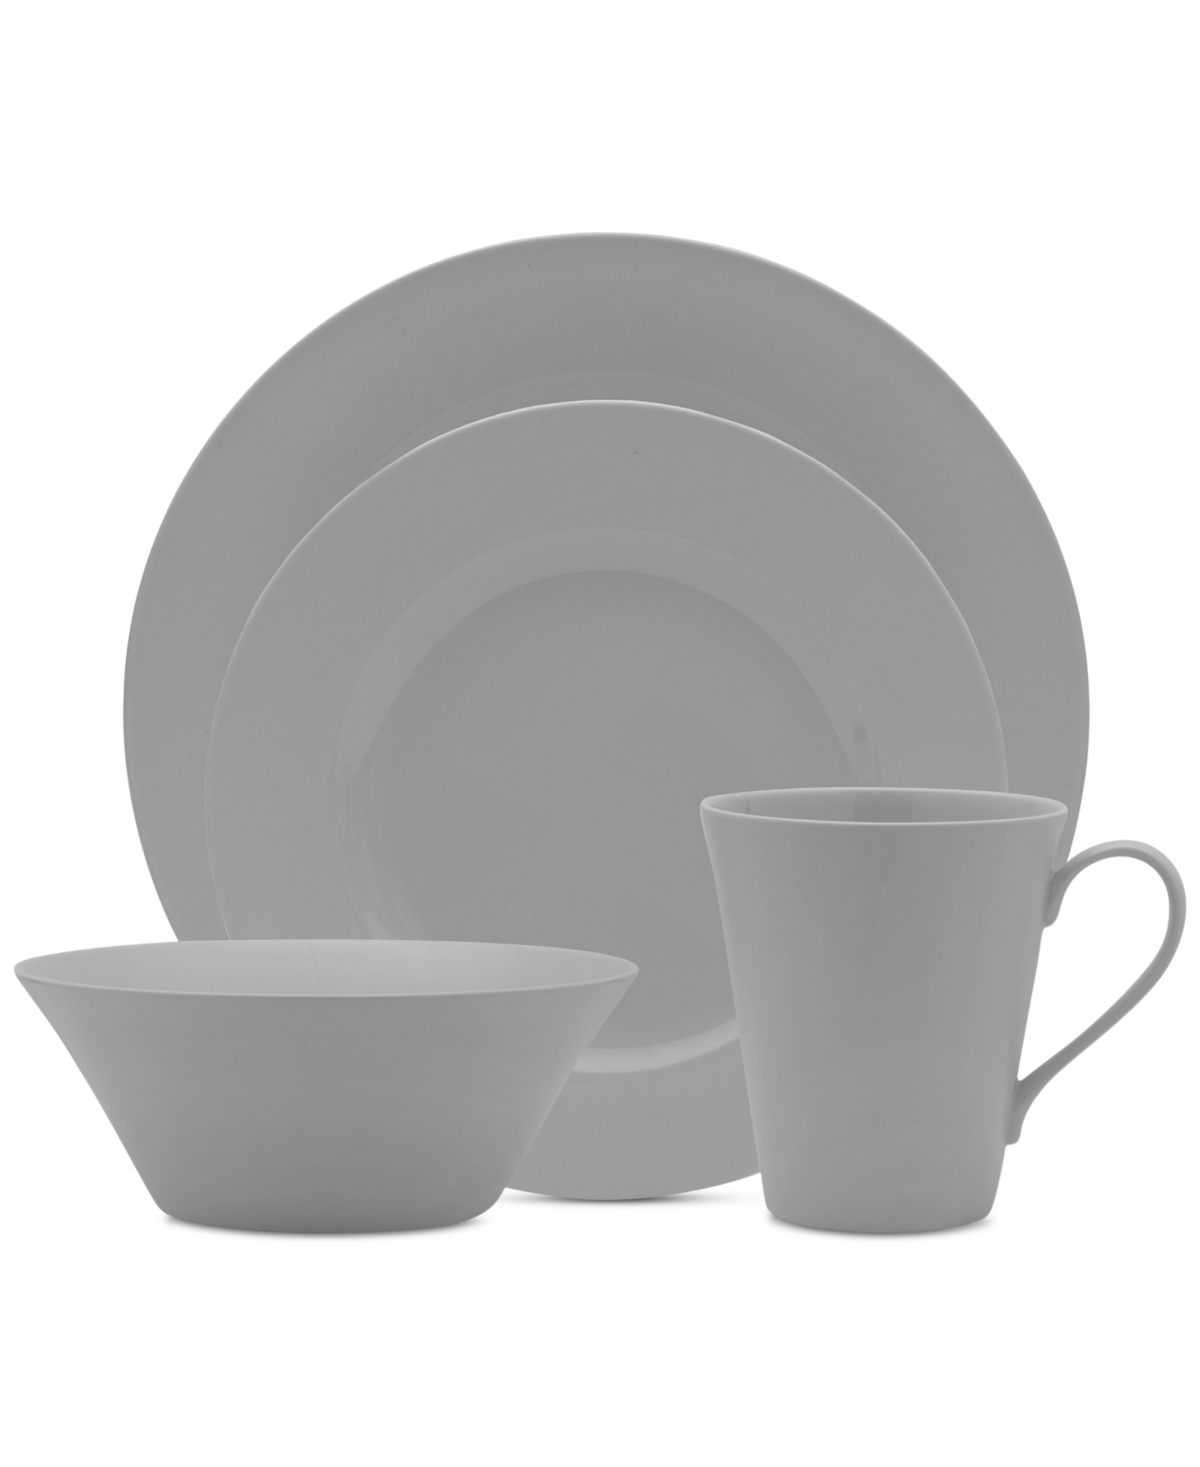 Delray Grey 4-Pc. Place Setting - Grey